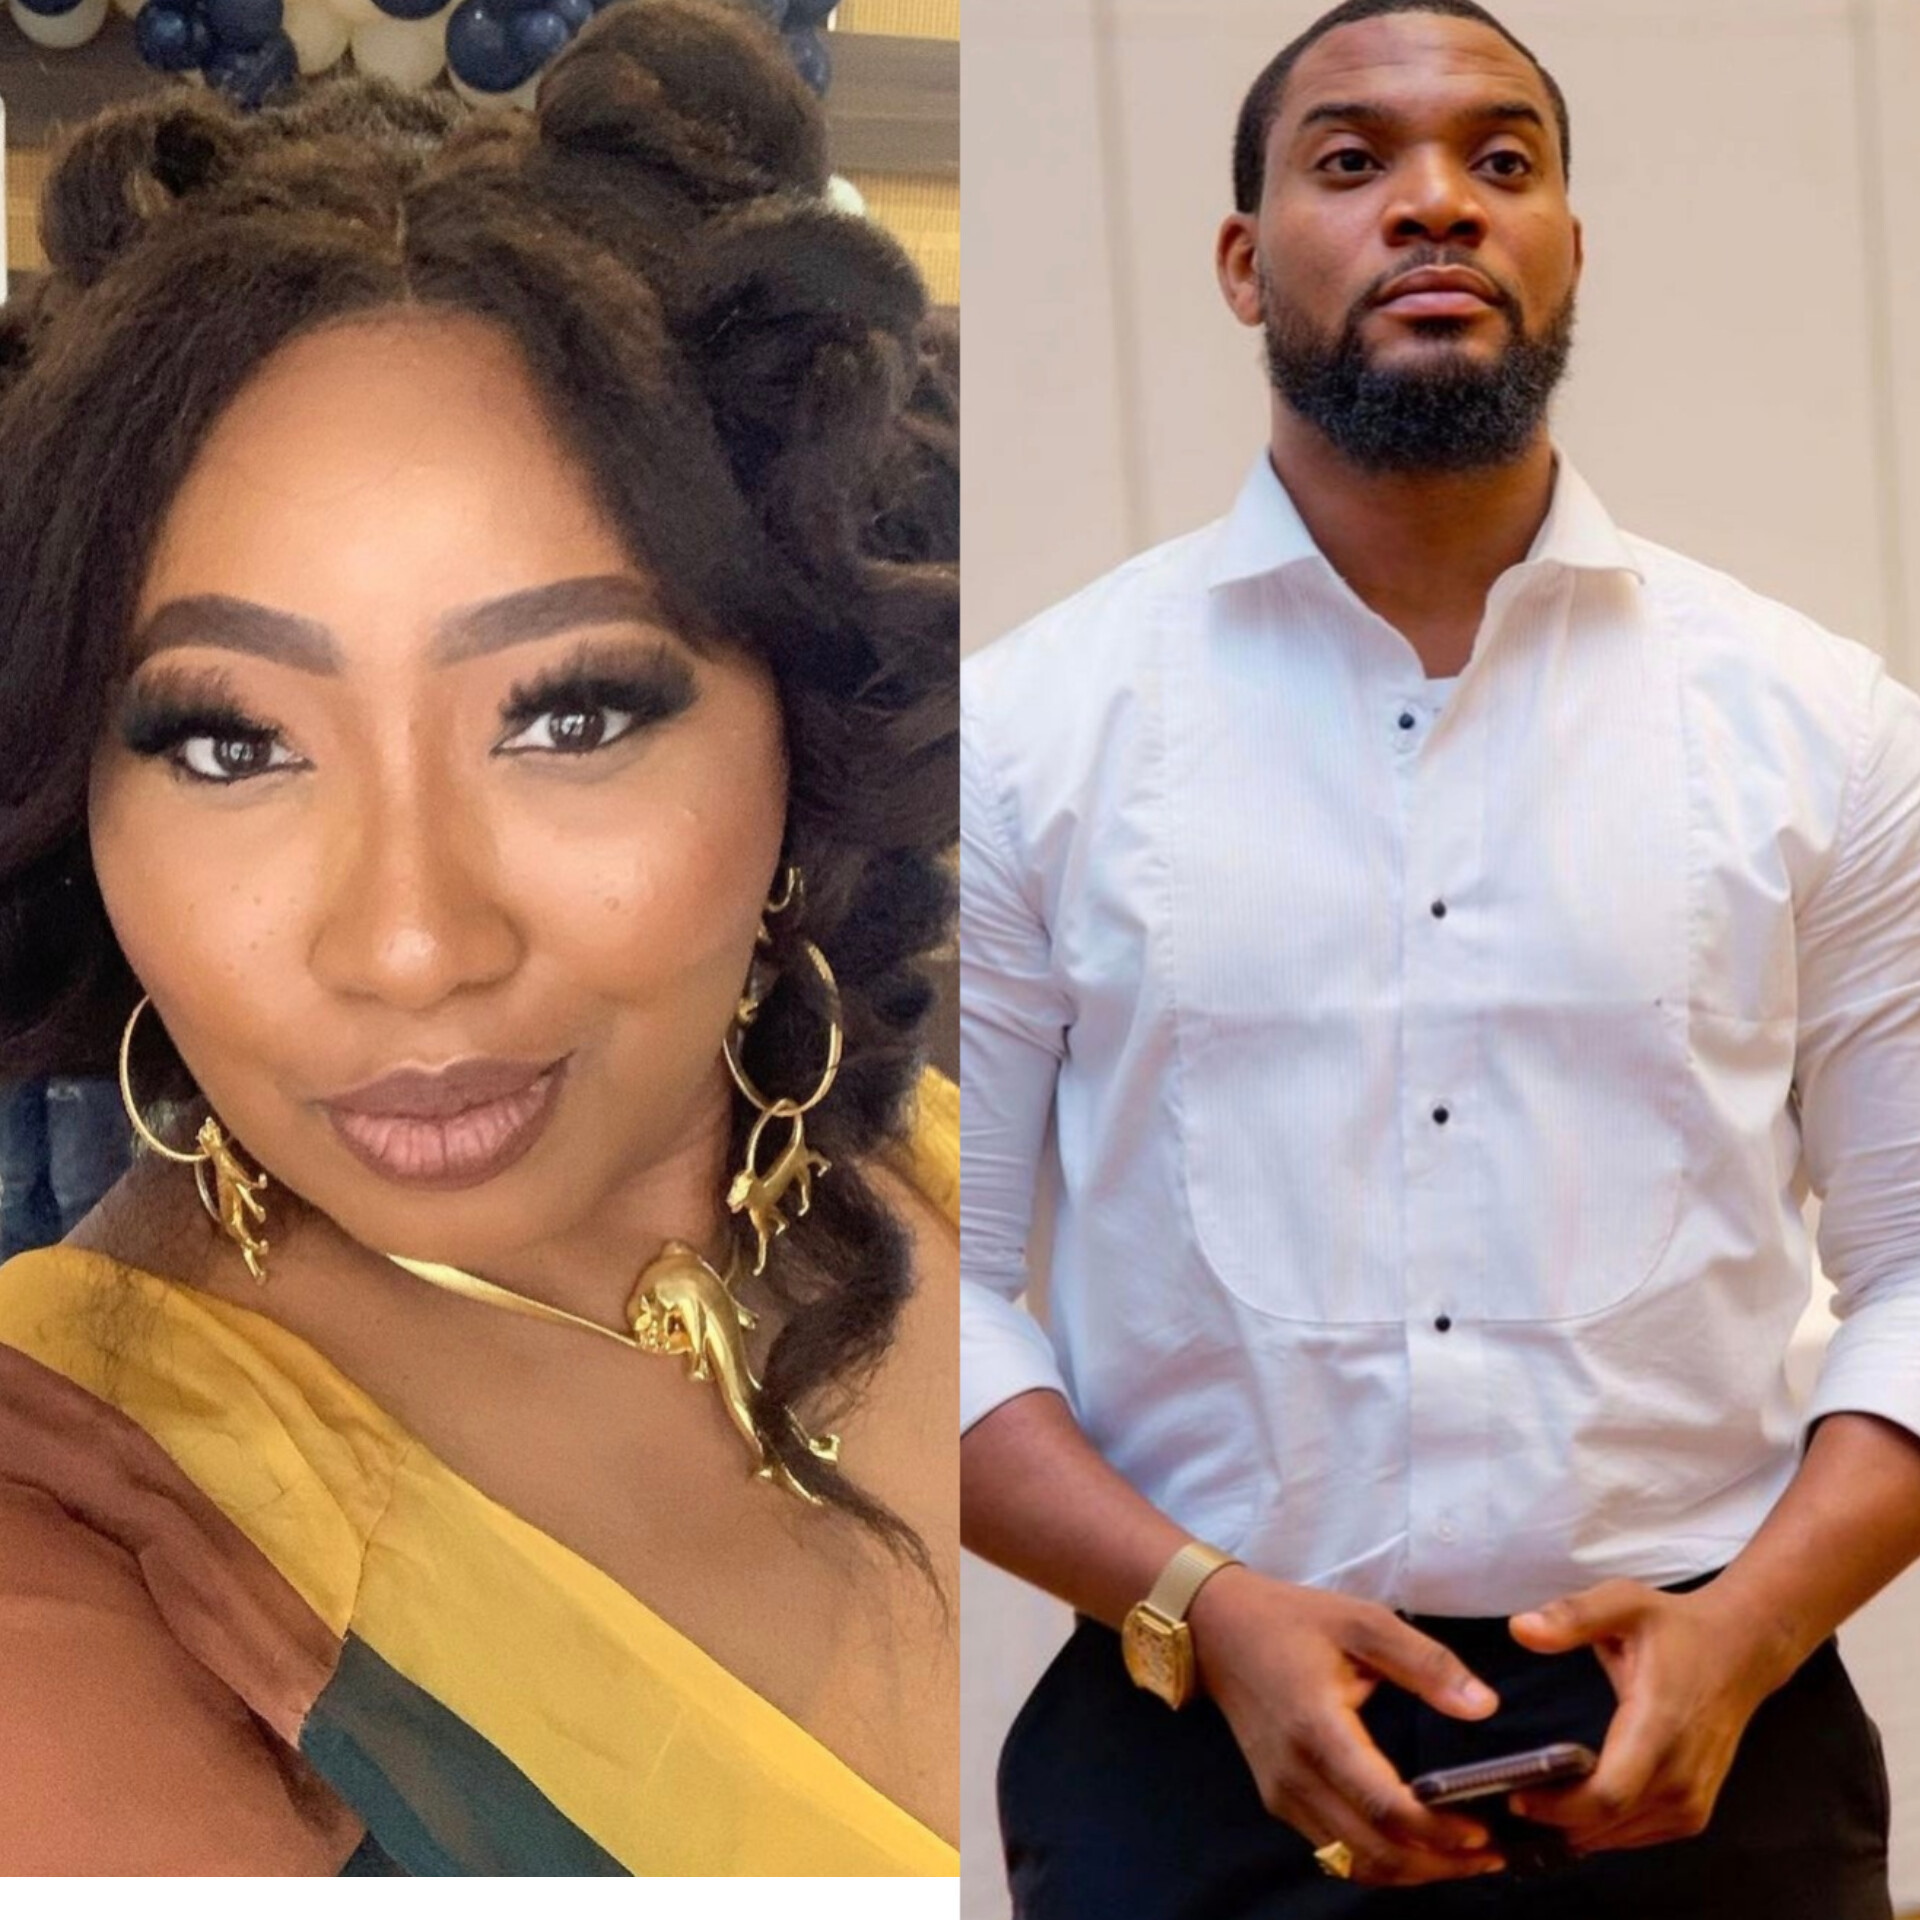 Obi/Soludo clash: Stick to resurrection via mythical birds - Latasha Ngwube knocks actor Kunle Remi over his comment about ?reading and understanding;? he responds